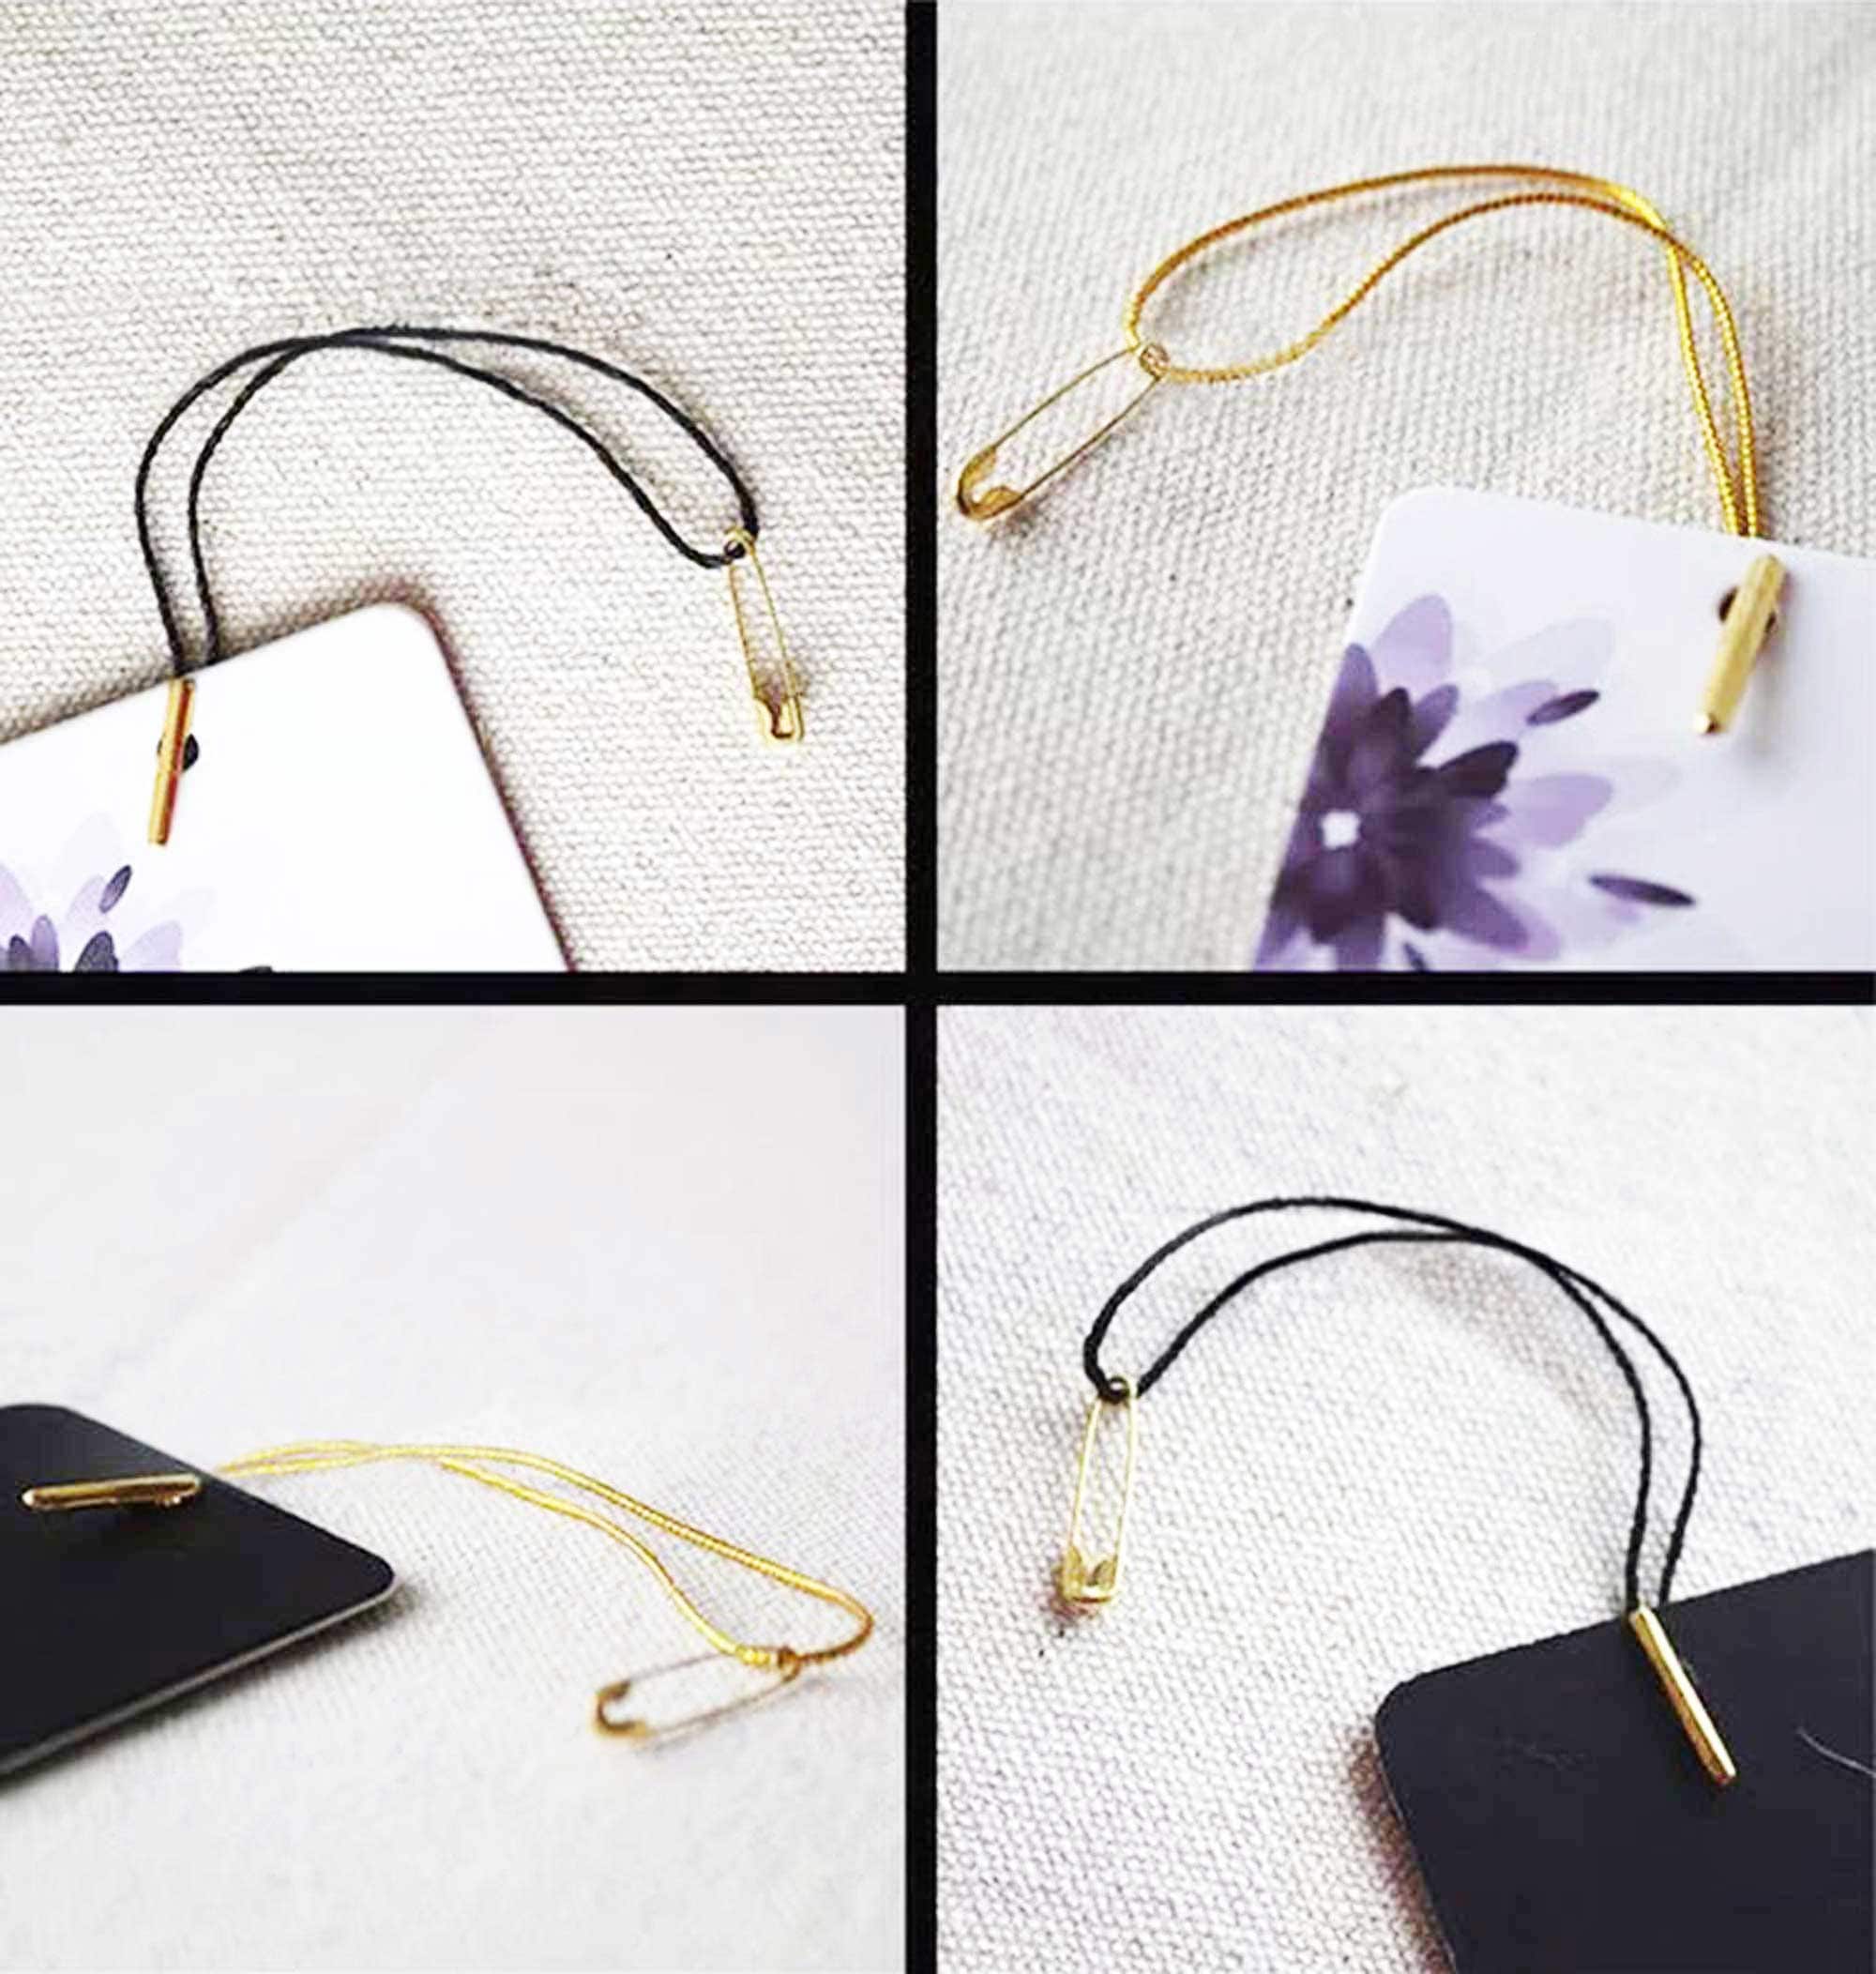 Safety Pin Hang Tag, Small Jewelry Hang Tag With Gold String And Safety Pin  $0.045 - Wholesale China Safety Pin Hang Tag at factory prices from Yiwu  Dilin Paper Products Co., Ltd